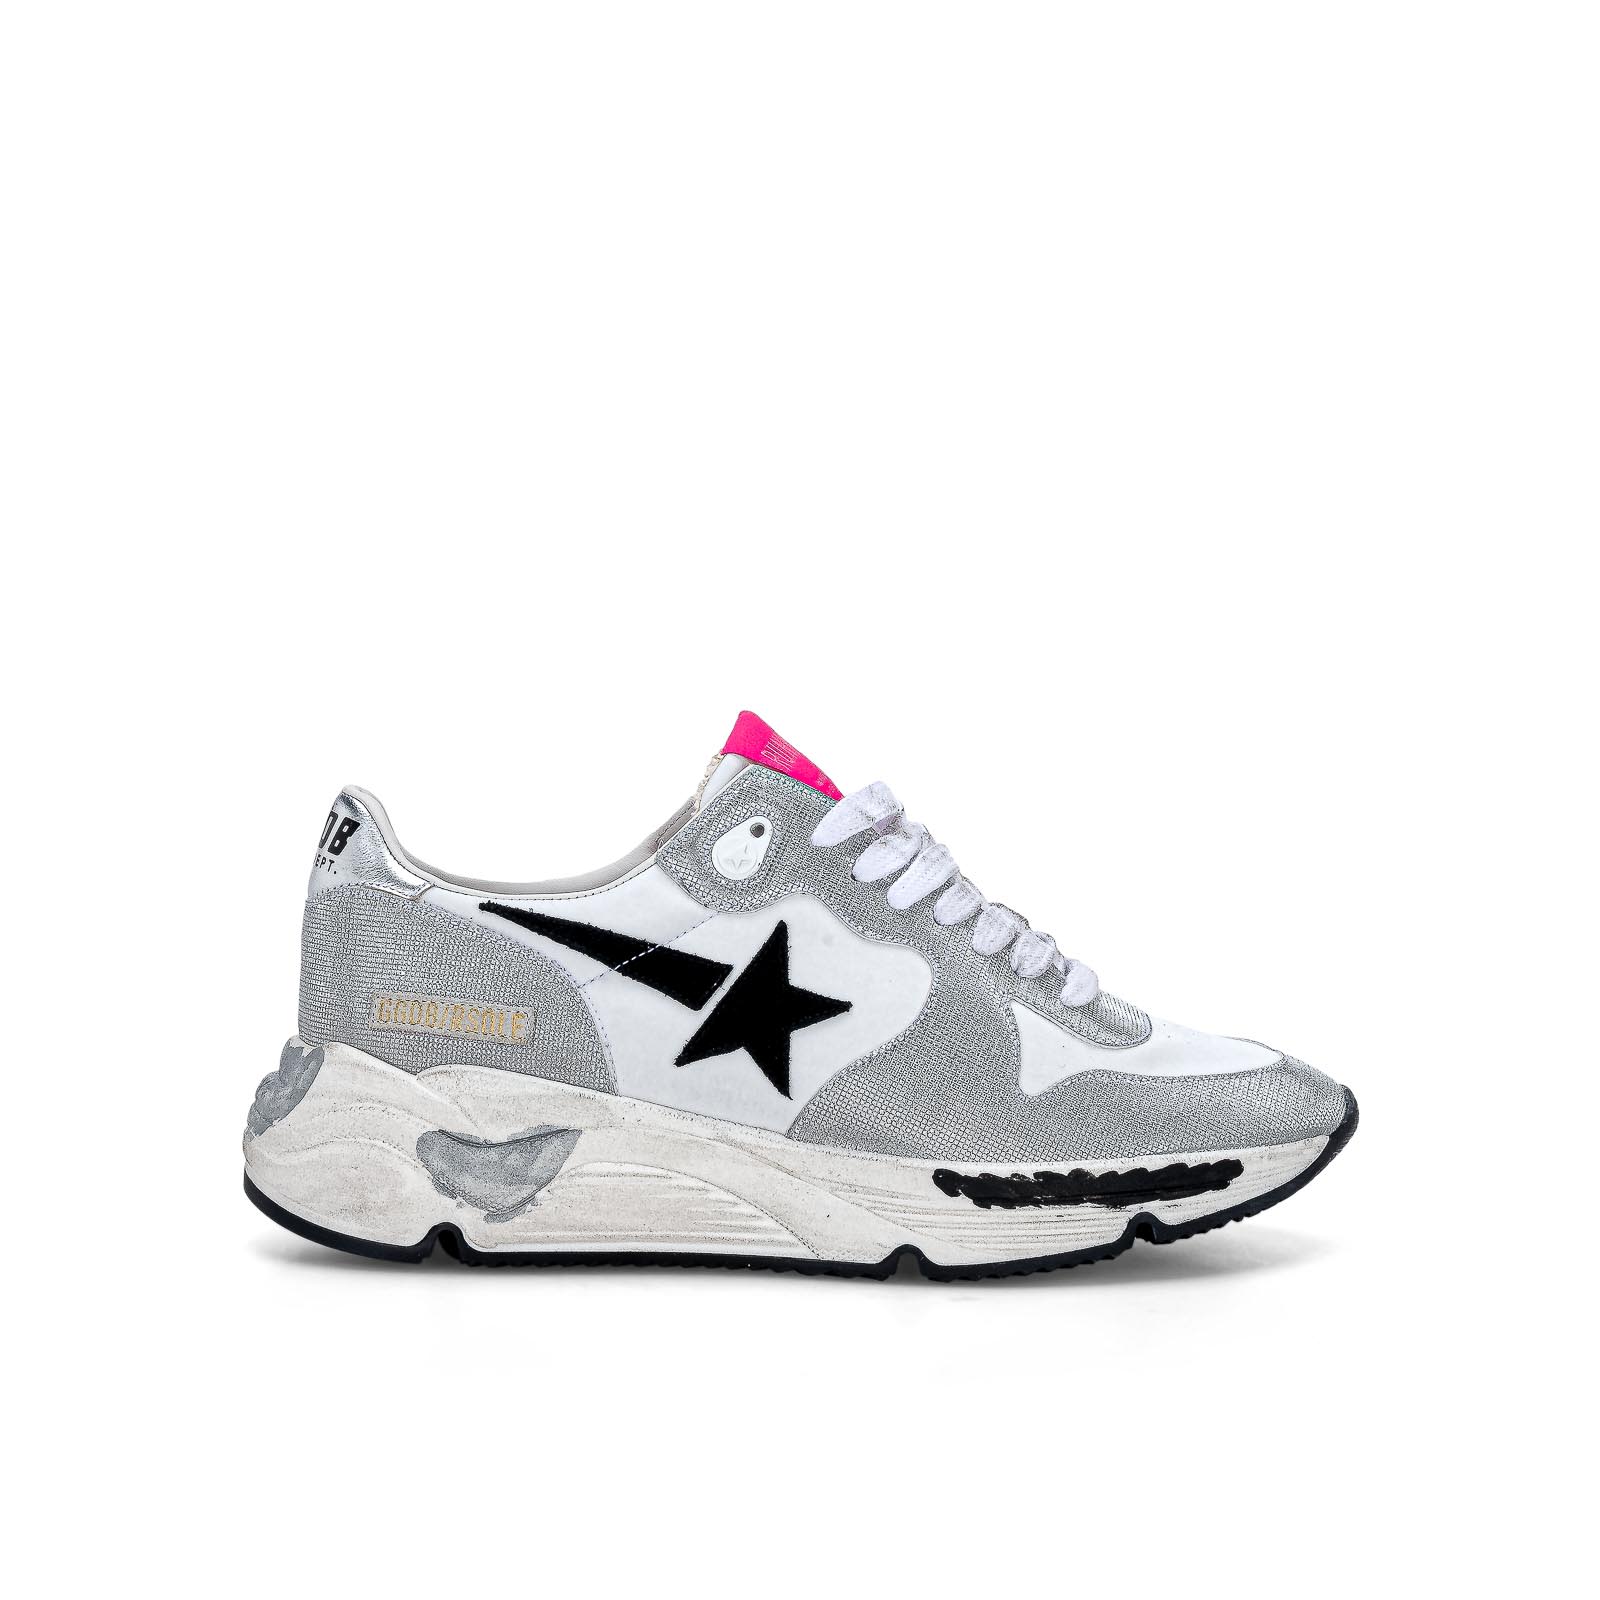 Buy Golden Goose Glitter And White Running Sole online, shop Golden Goose shoes with free shipping